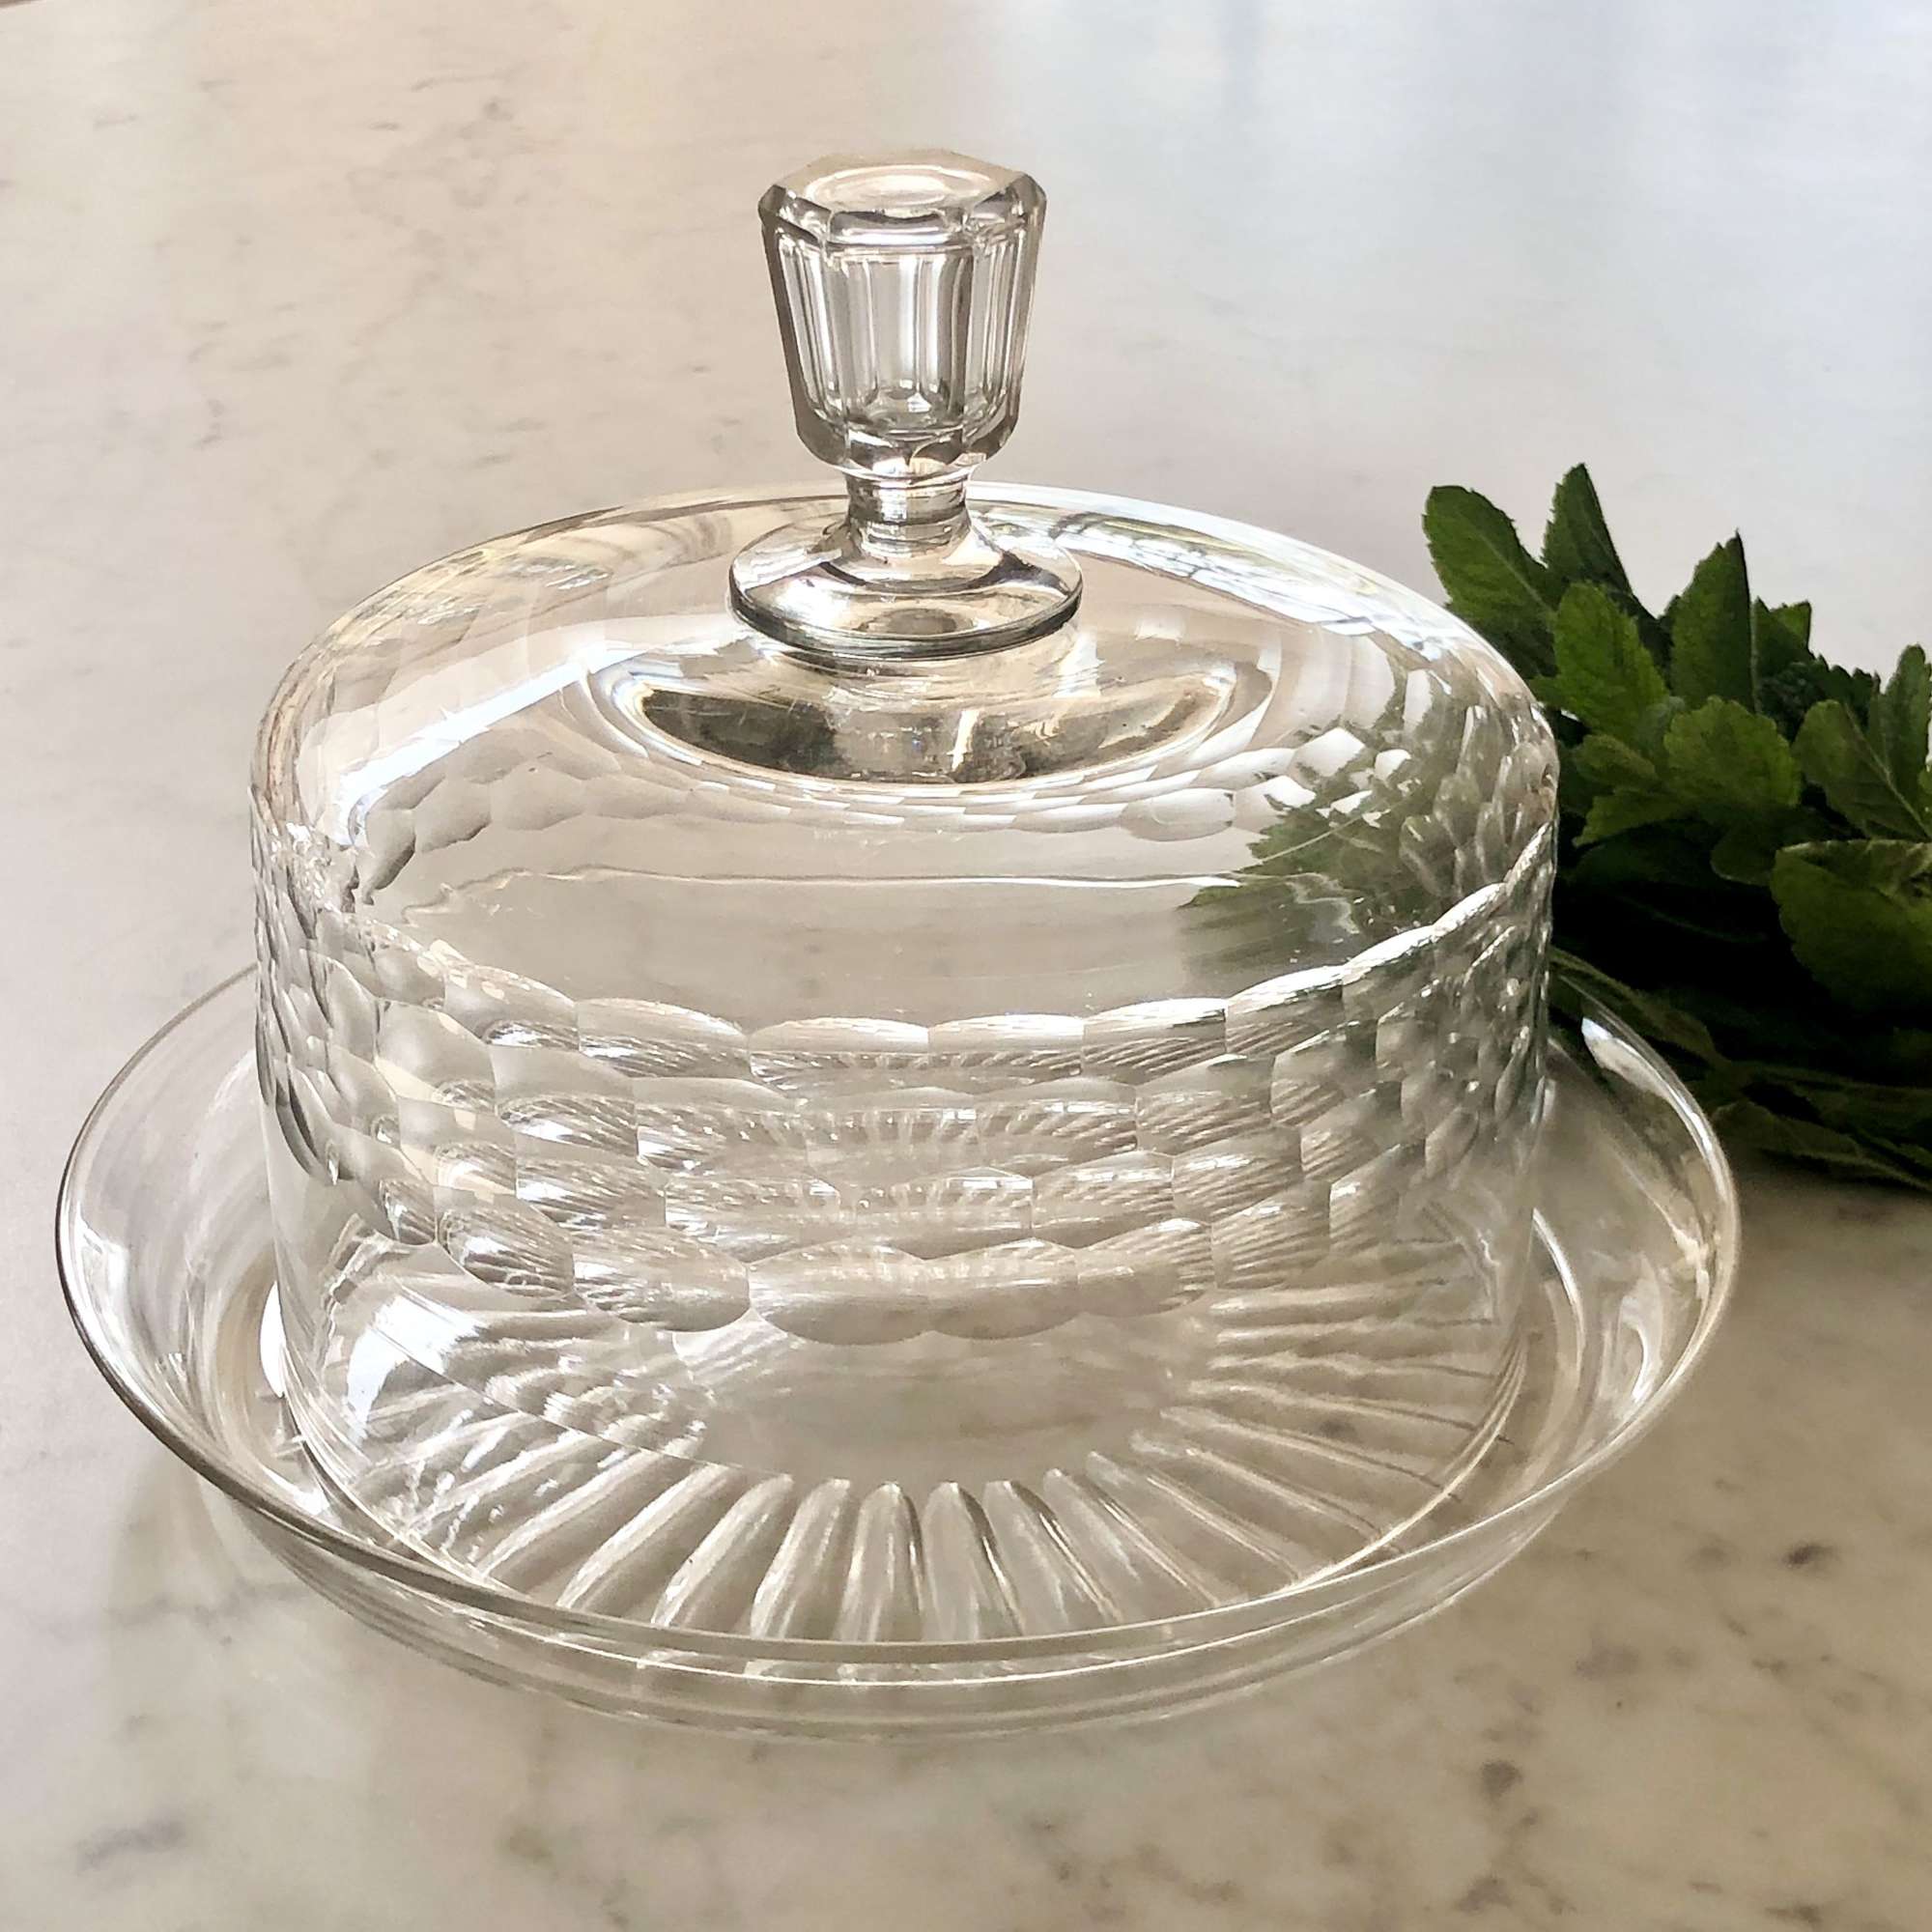 Baccarat crystal serving dome and matching star cut platter